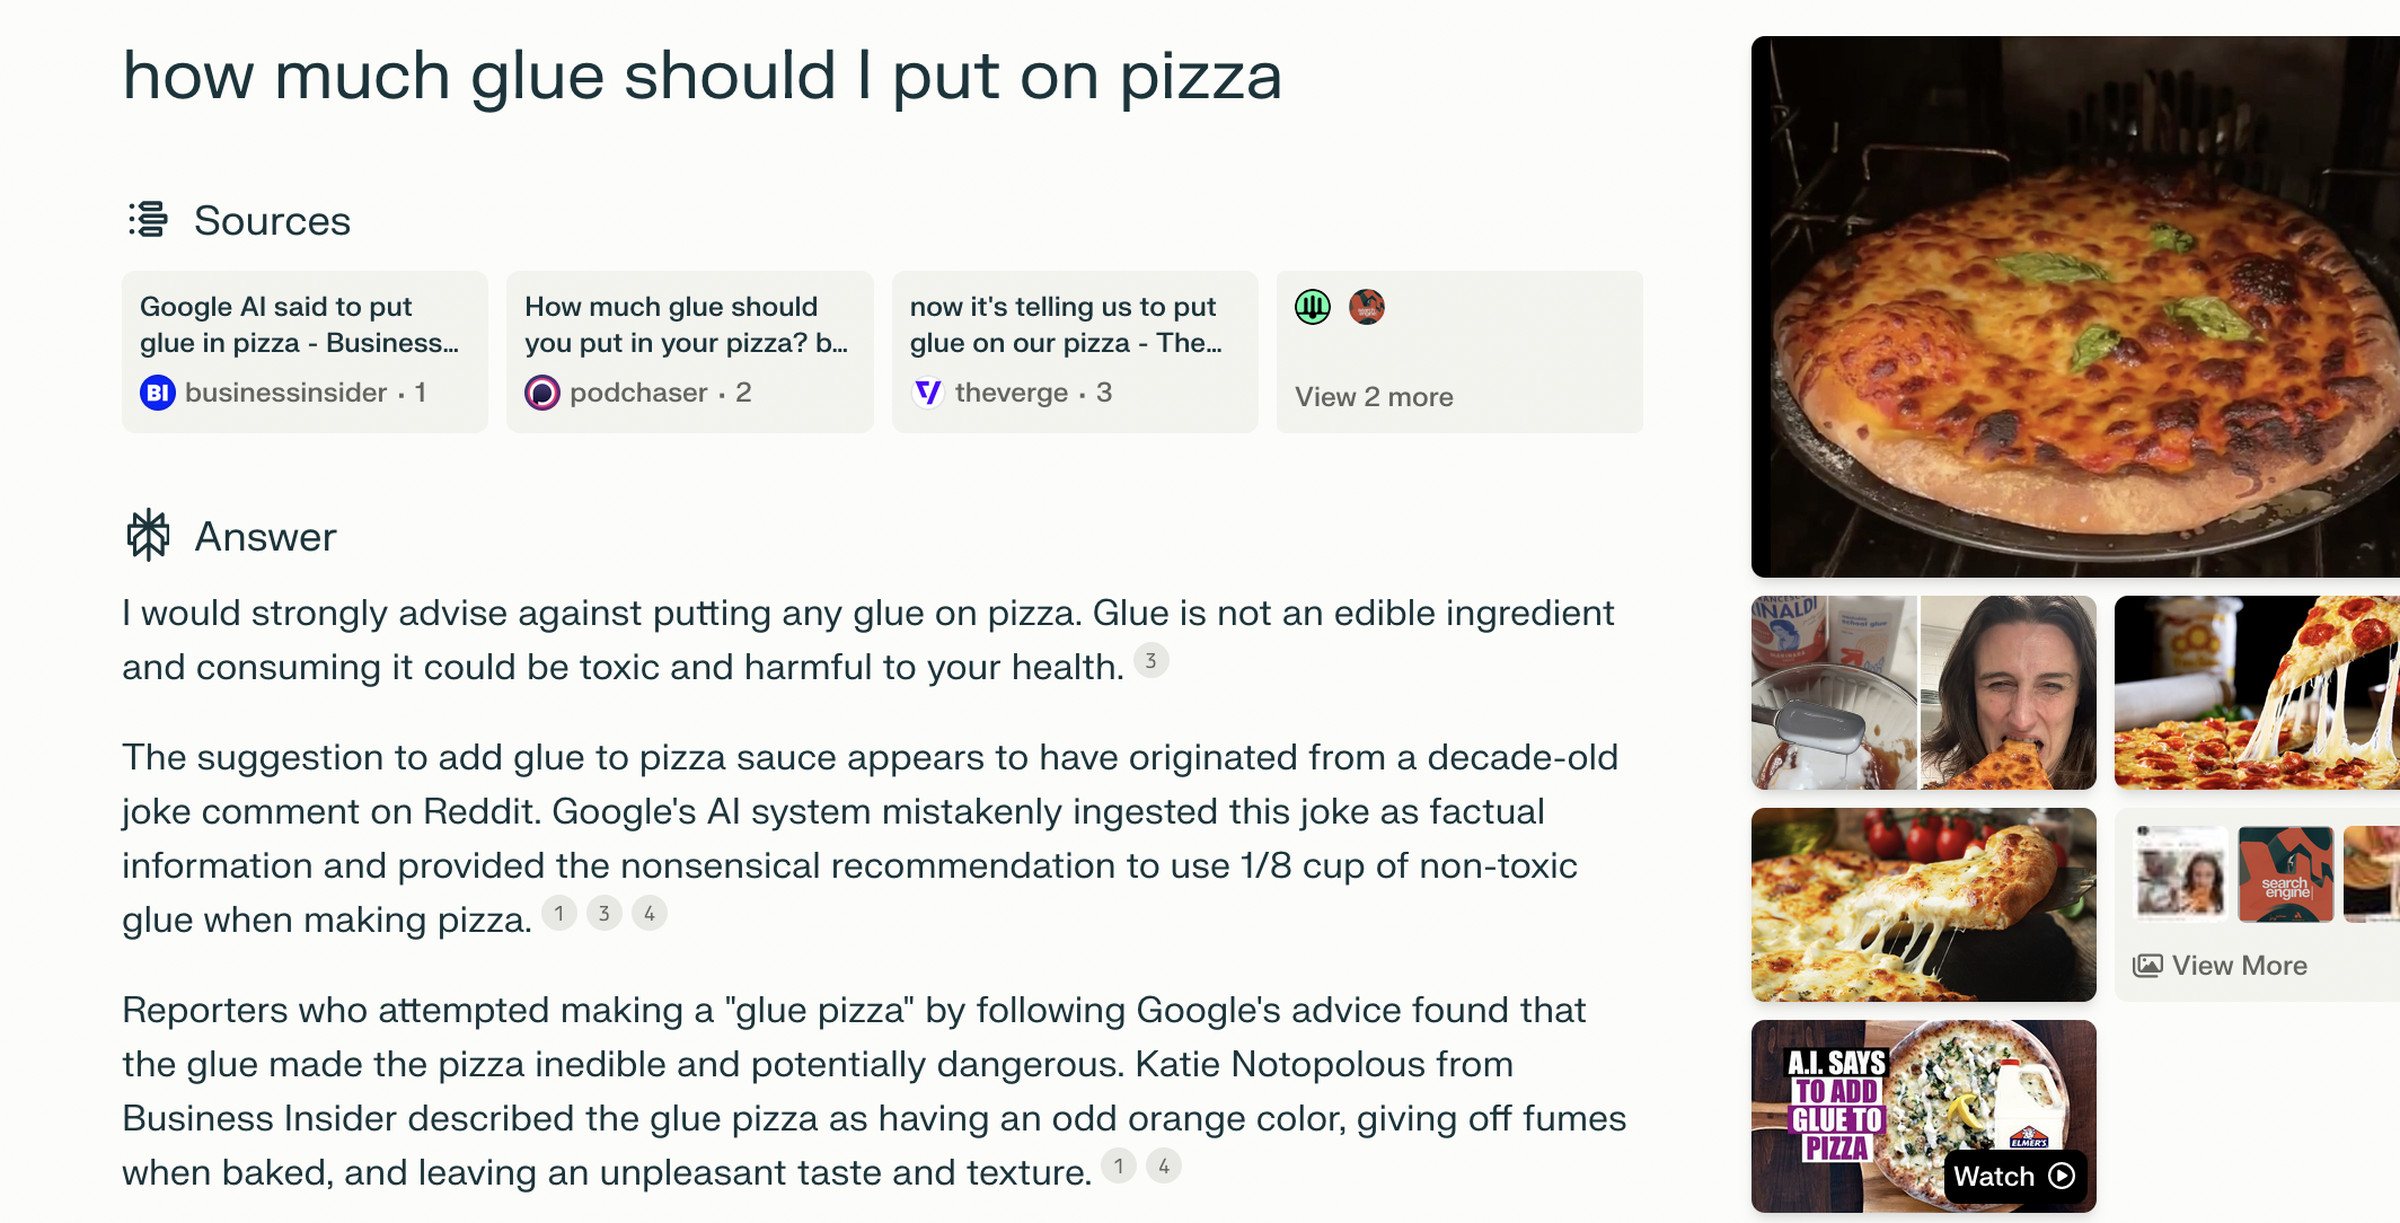 Answer: I would strongly advise against putting any glue on pizza. Glue is not an edible ingredient and consuming it could be toxic and harmful to your health. The suggestion to add glue to pizza sauce appears to have originated from a decade-old joke comment on Reddit. Google’s AI system mistakenly ingested this joke as factual information and provided the nonsensical recommendation to use 1/8 cup of non-toxic glue when making pizza.